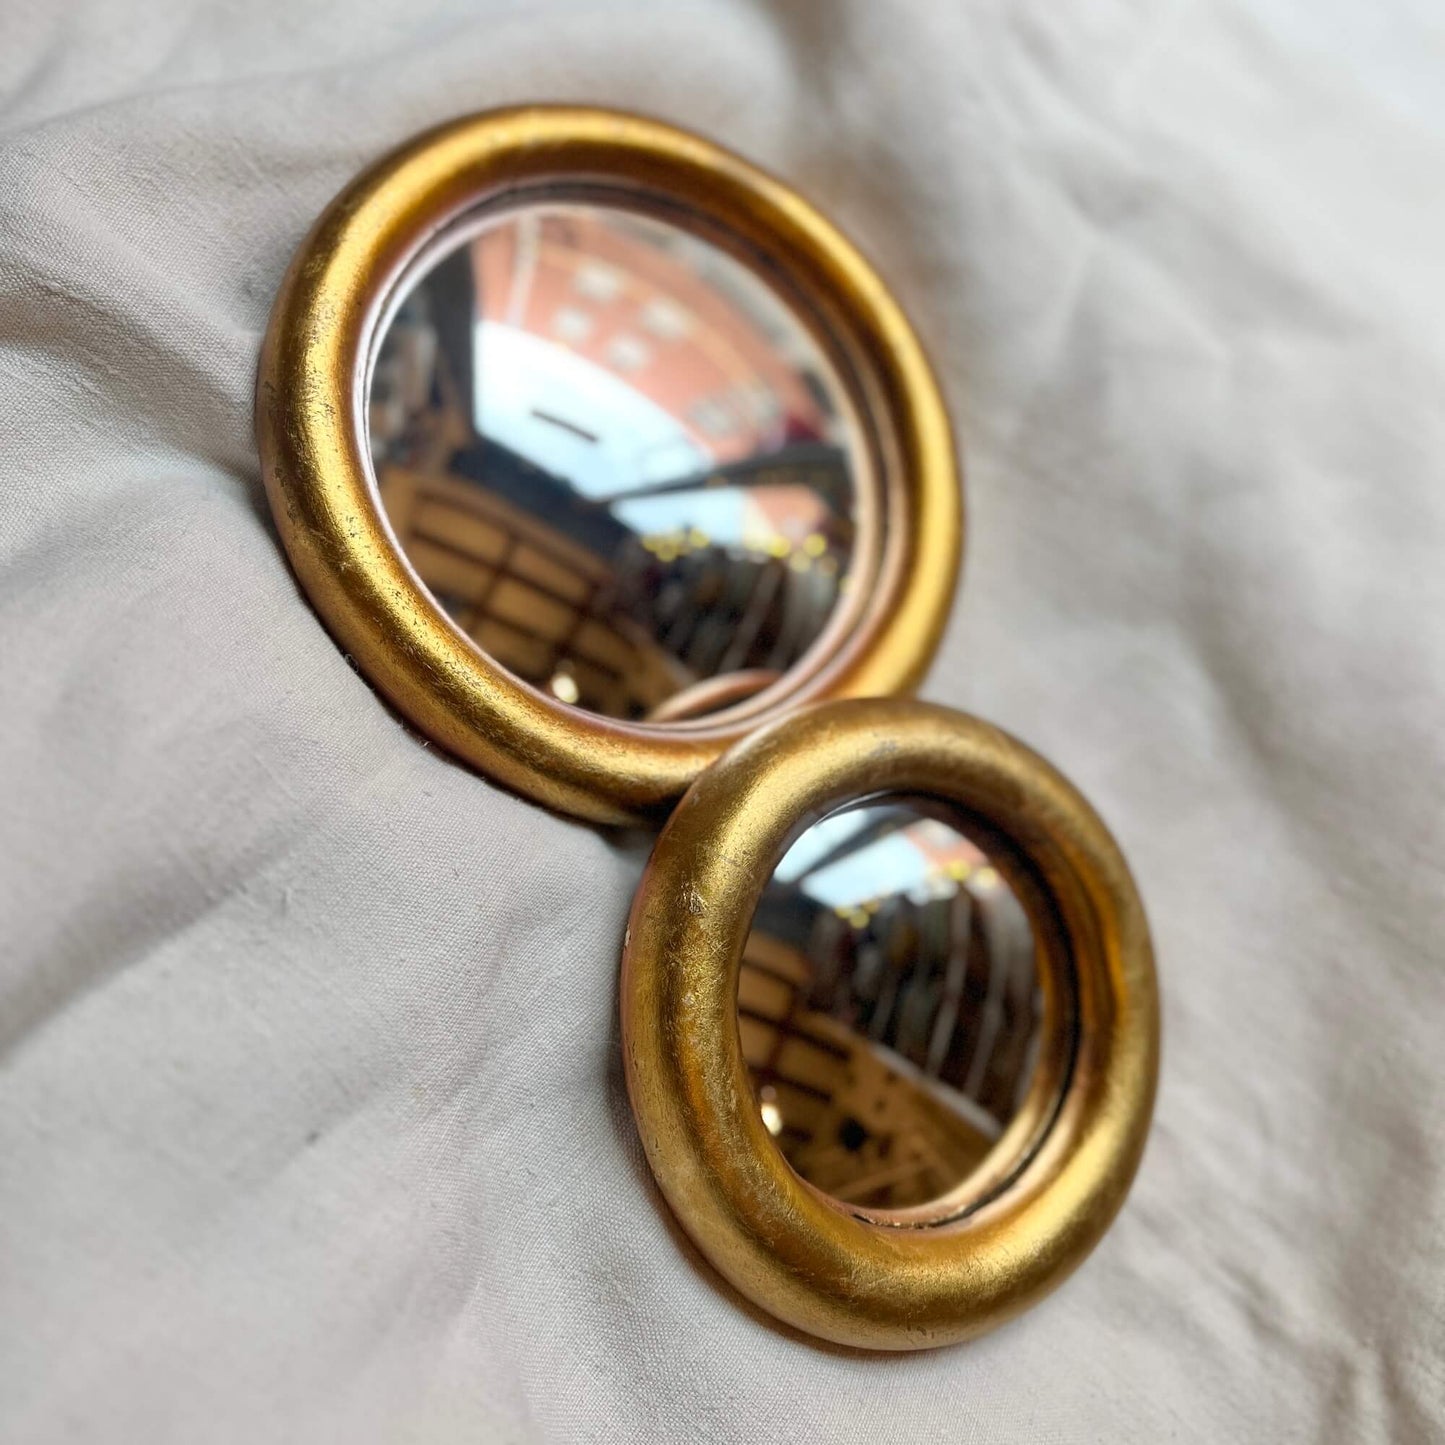 Convex mirror - Gold domed